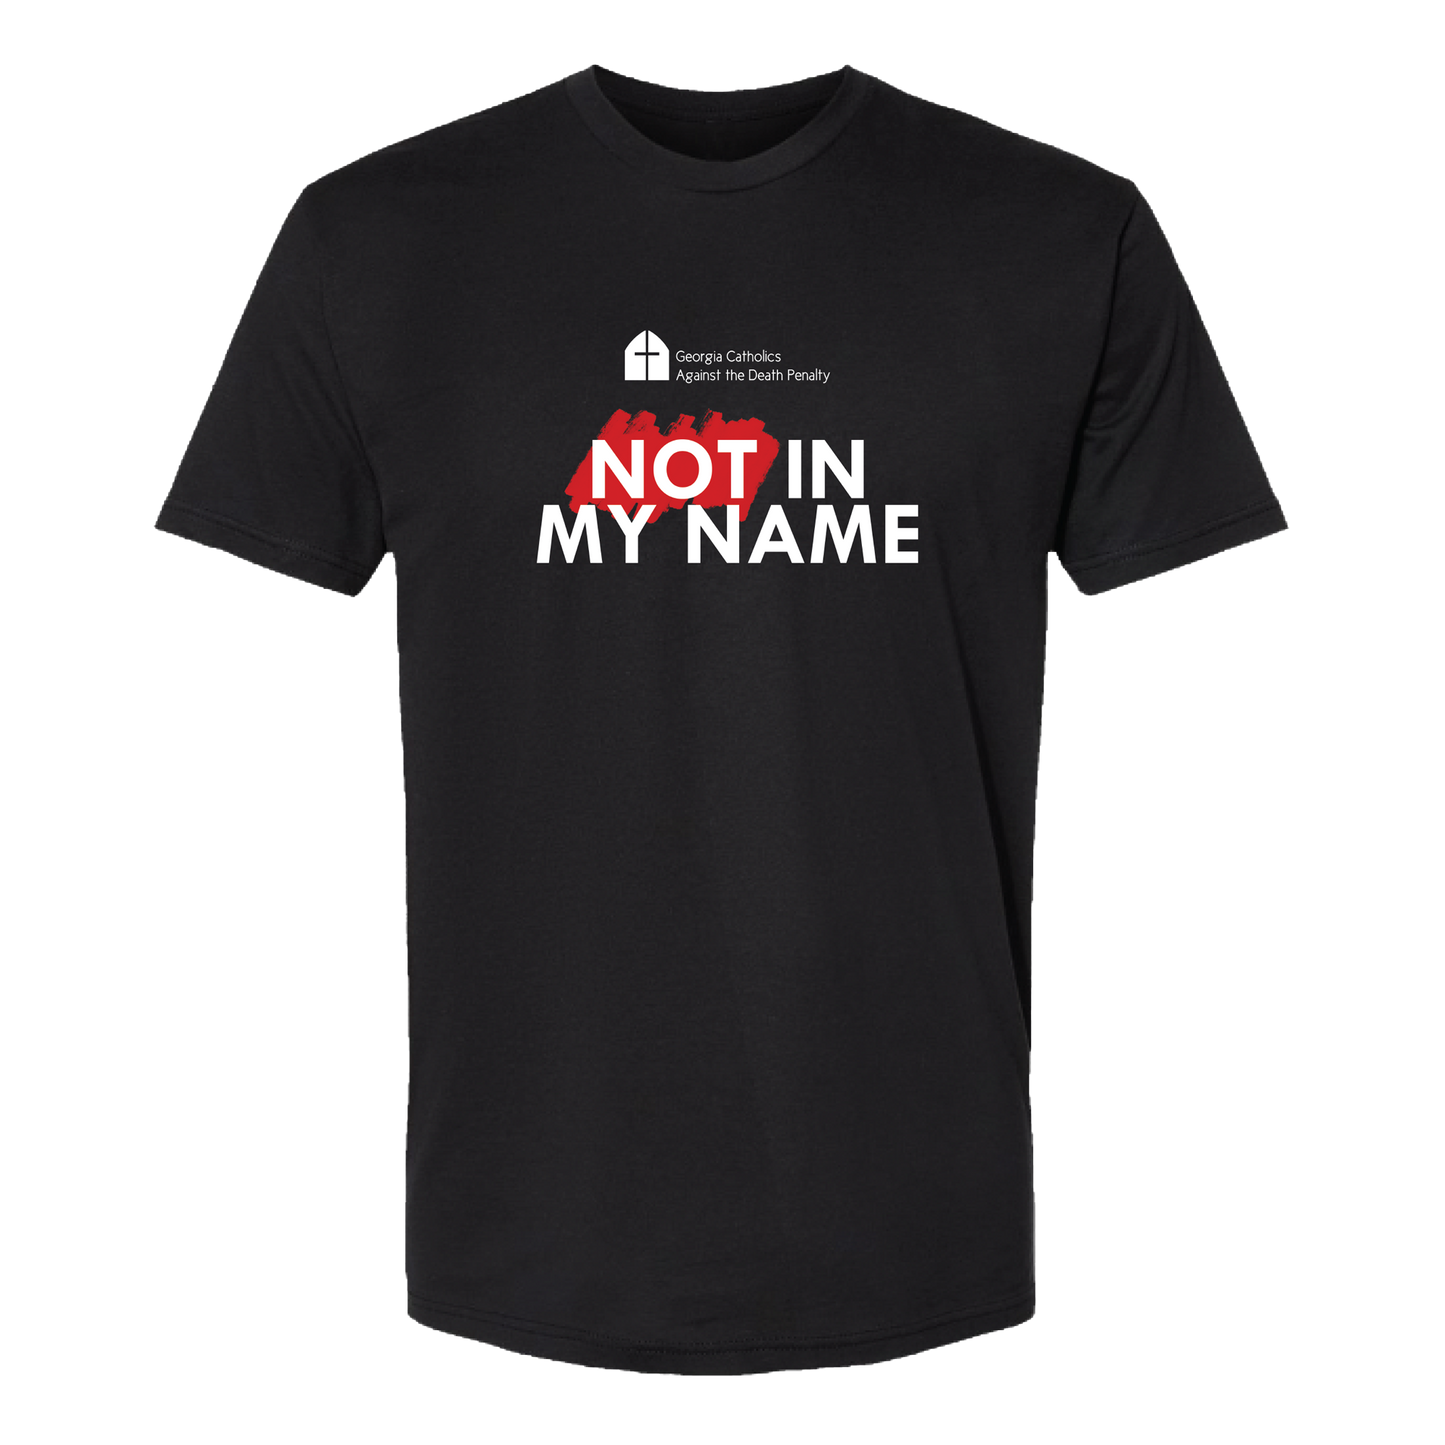 GACADP- Not In My Name T-Shirt